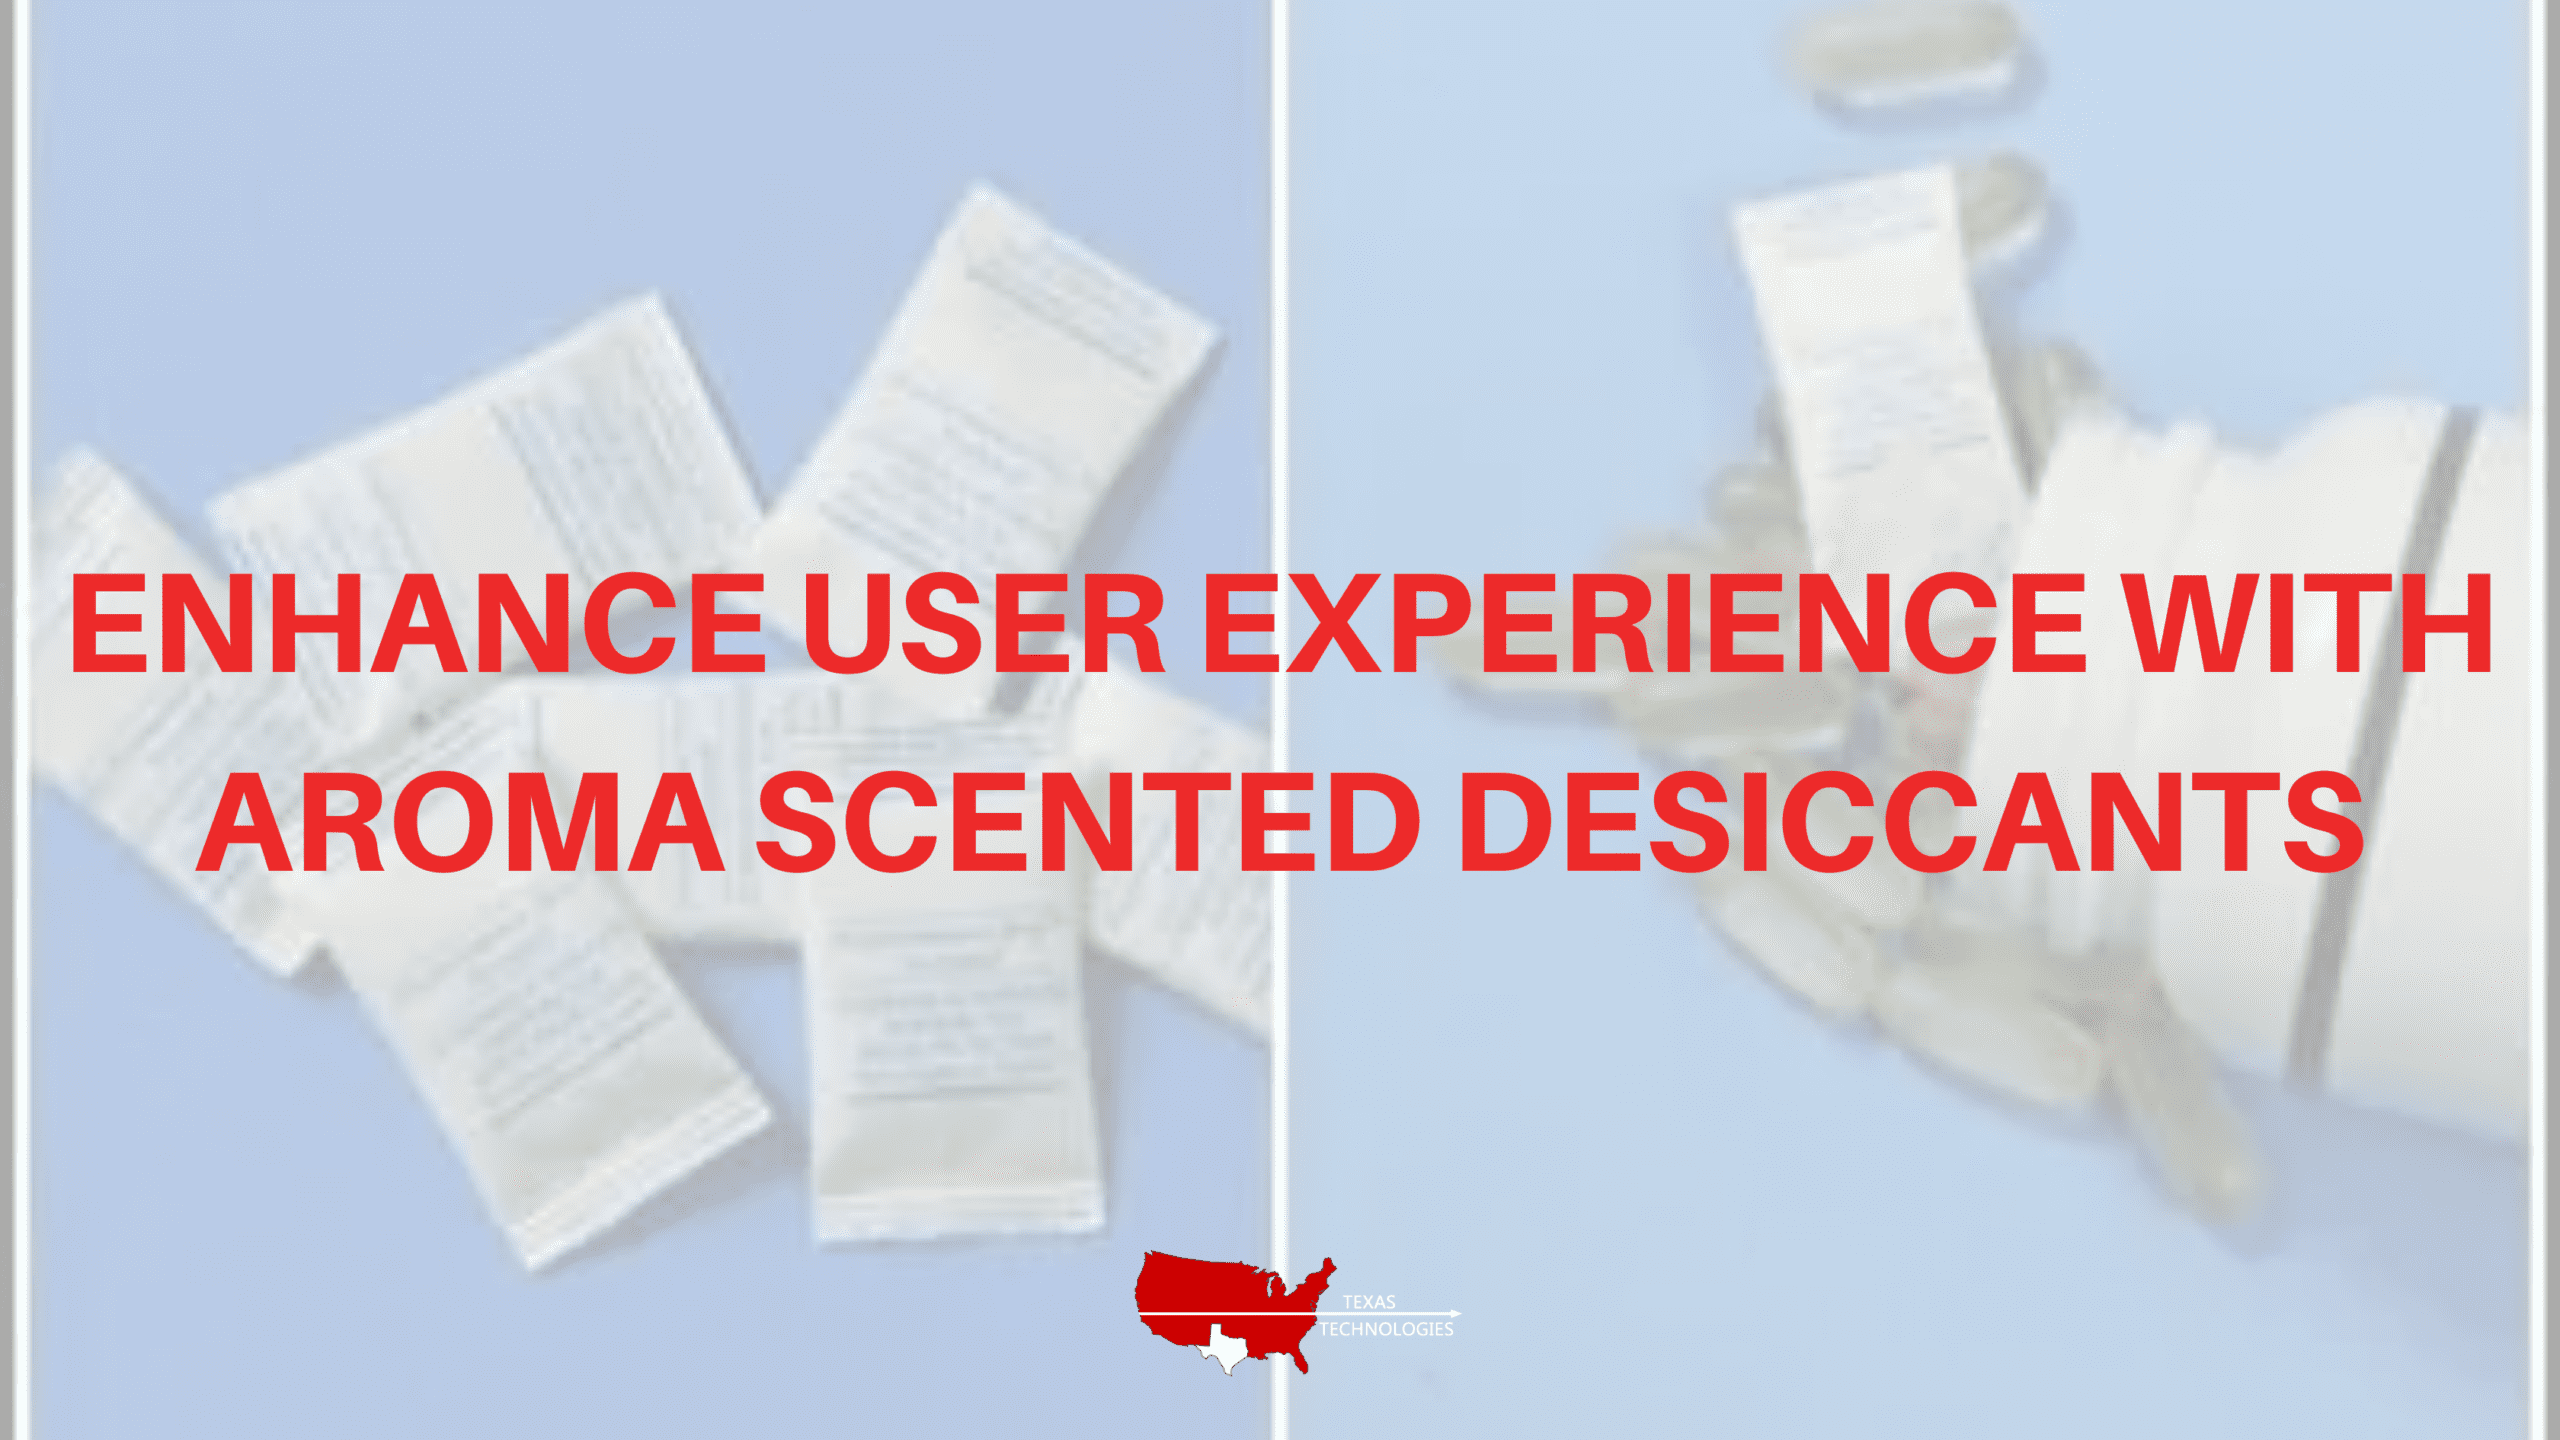 Enhance User Experience With Aroma Scented Desiccants